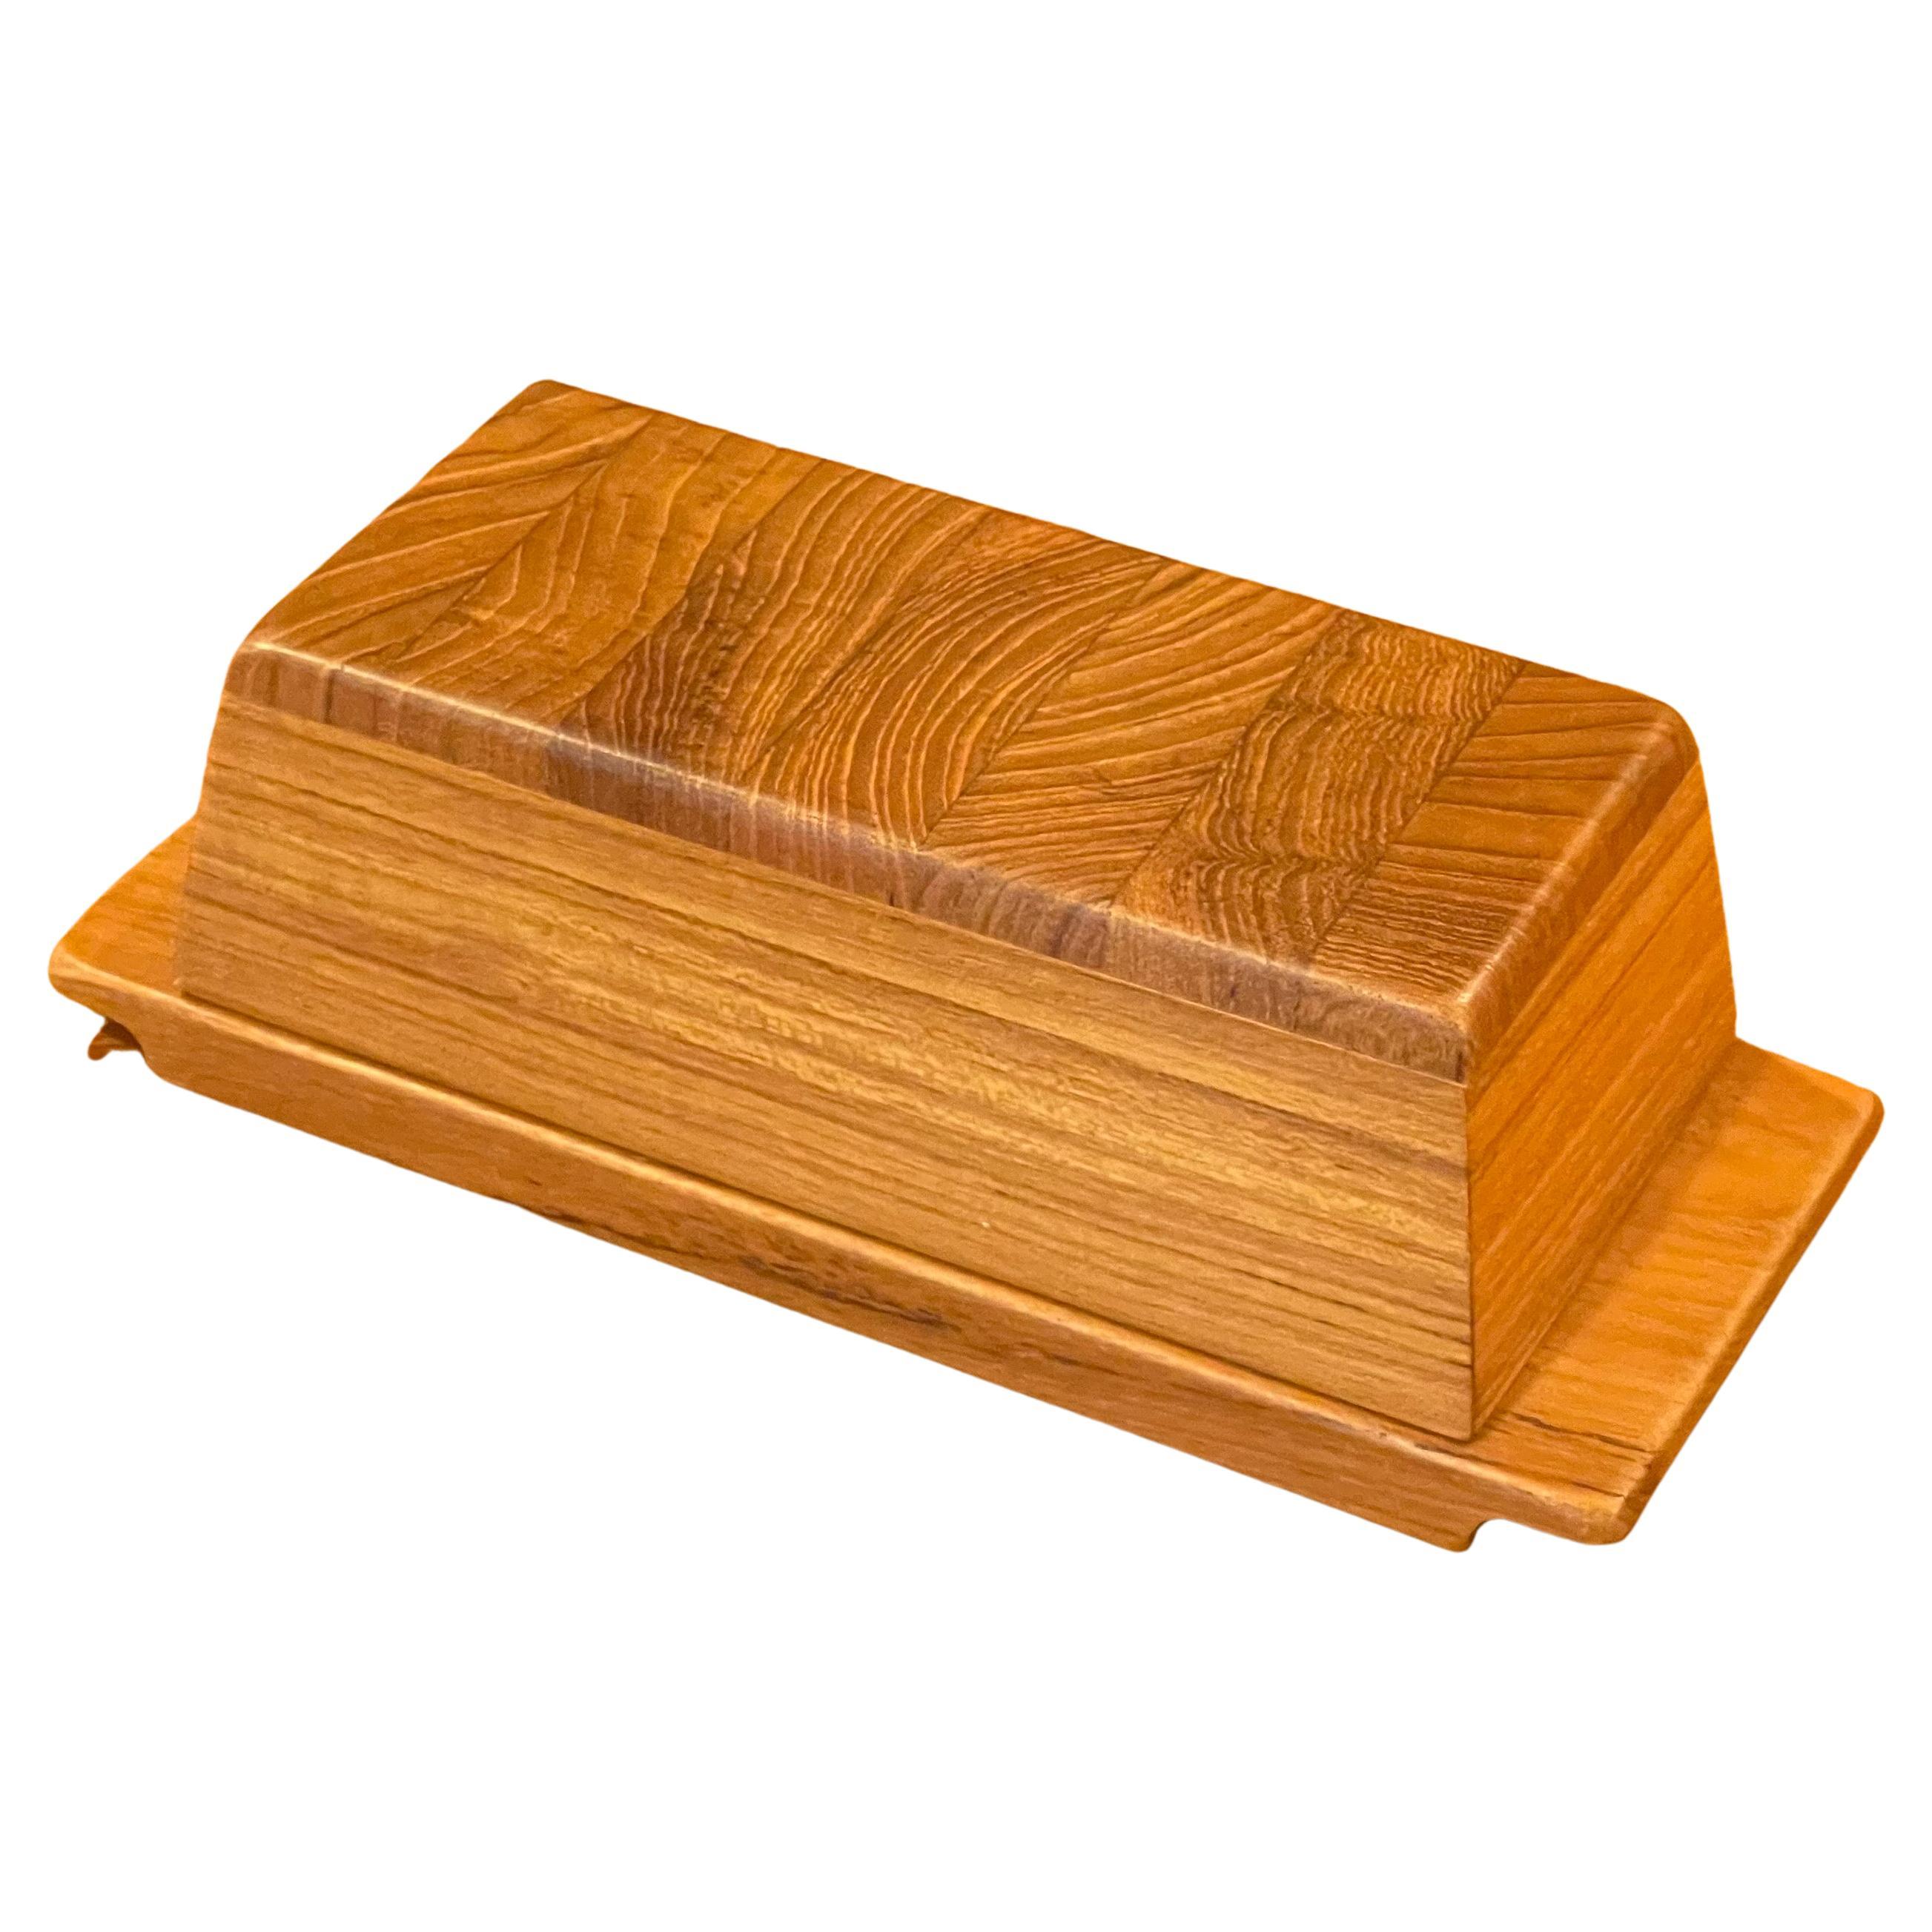 Staved Teak Lidded Butter Box / Container by Sigvard Nilsson for Sowe Konst For Sale 8